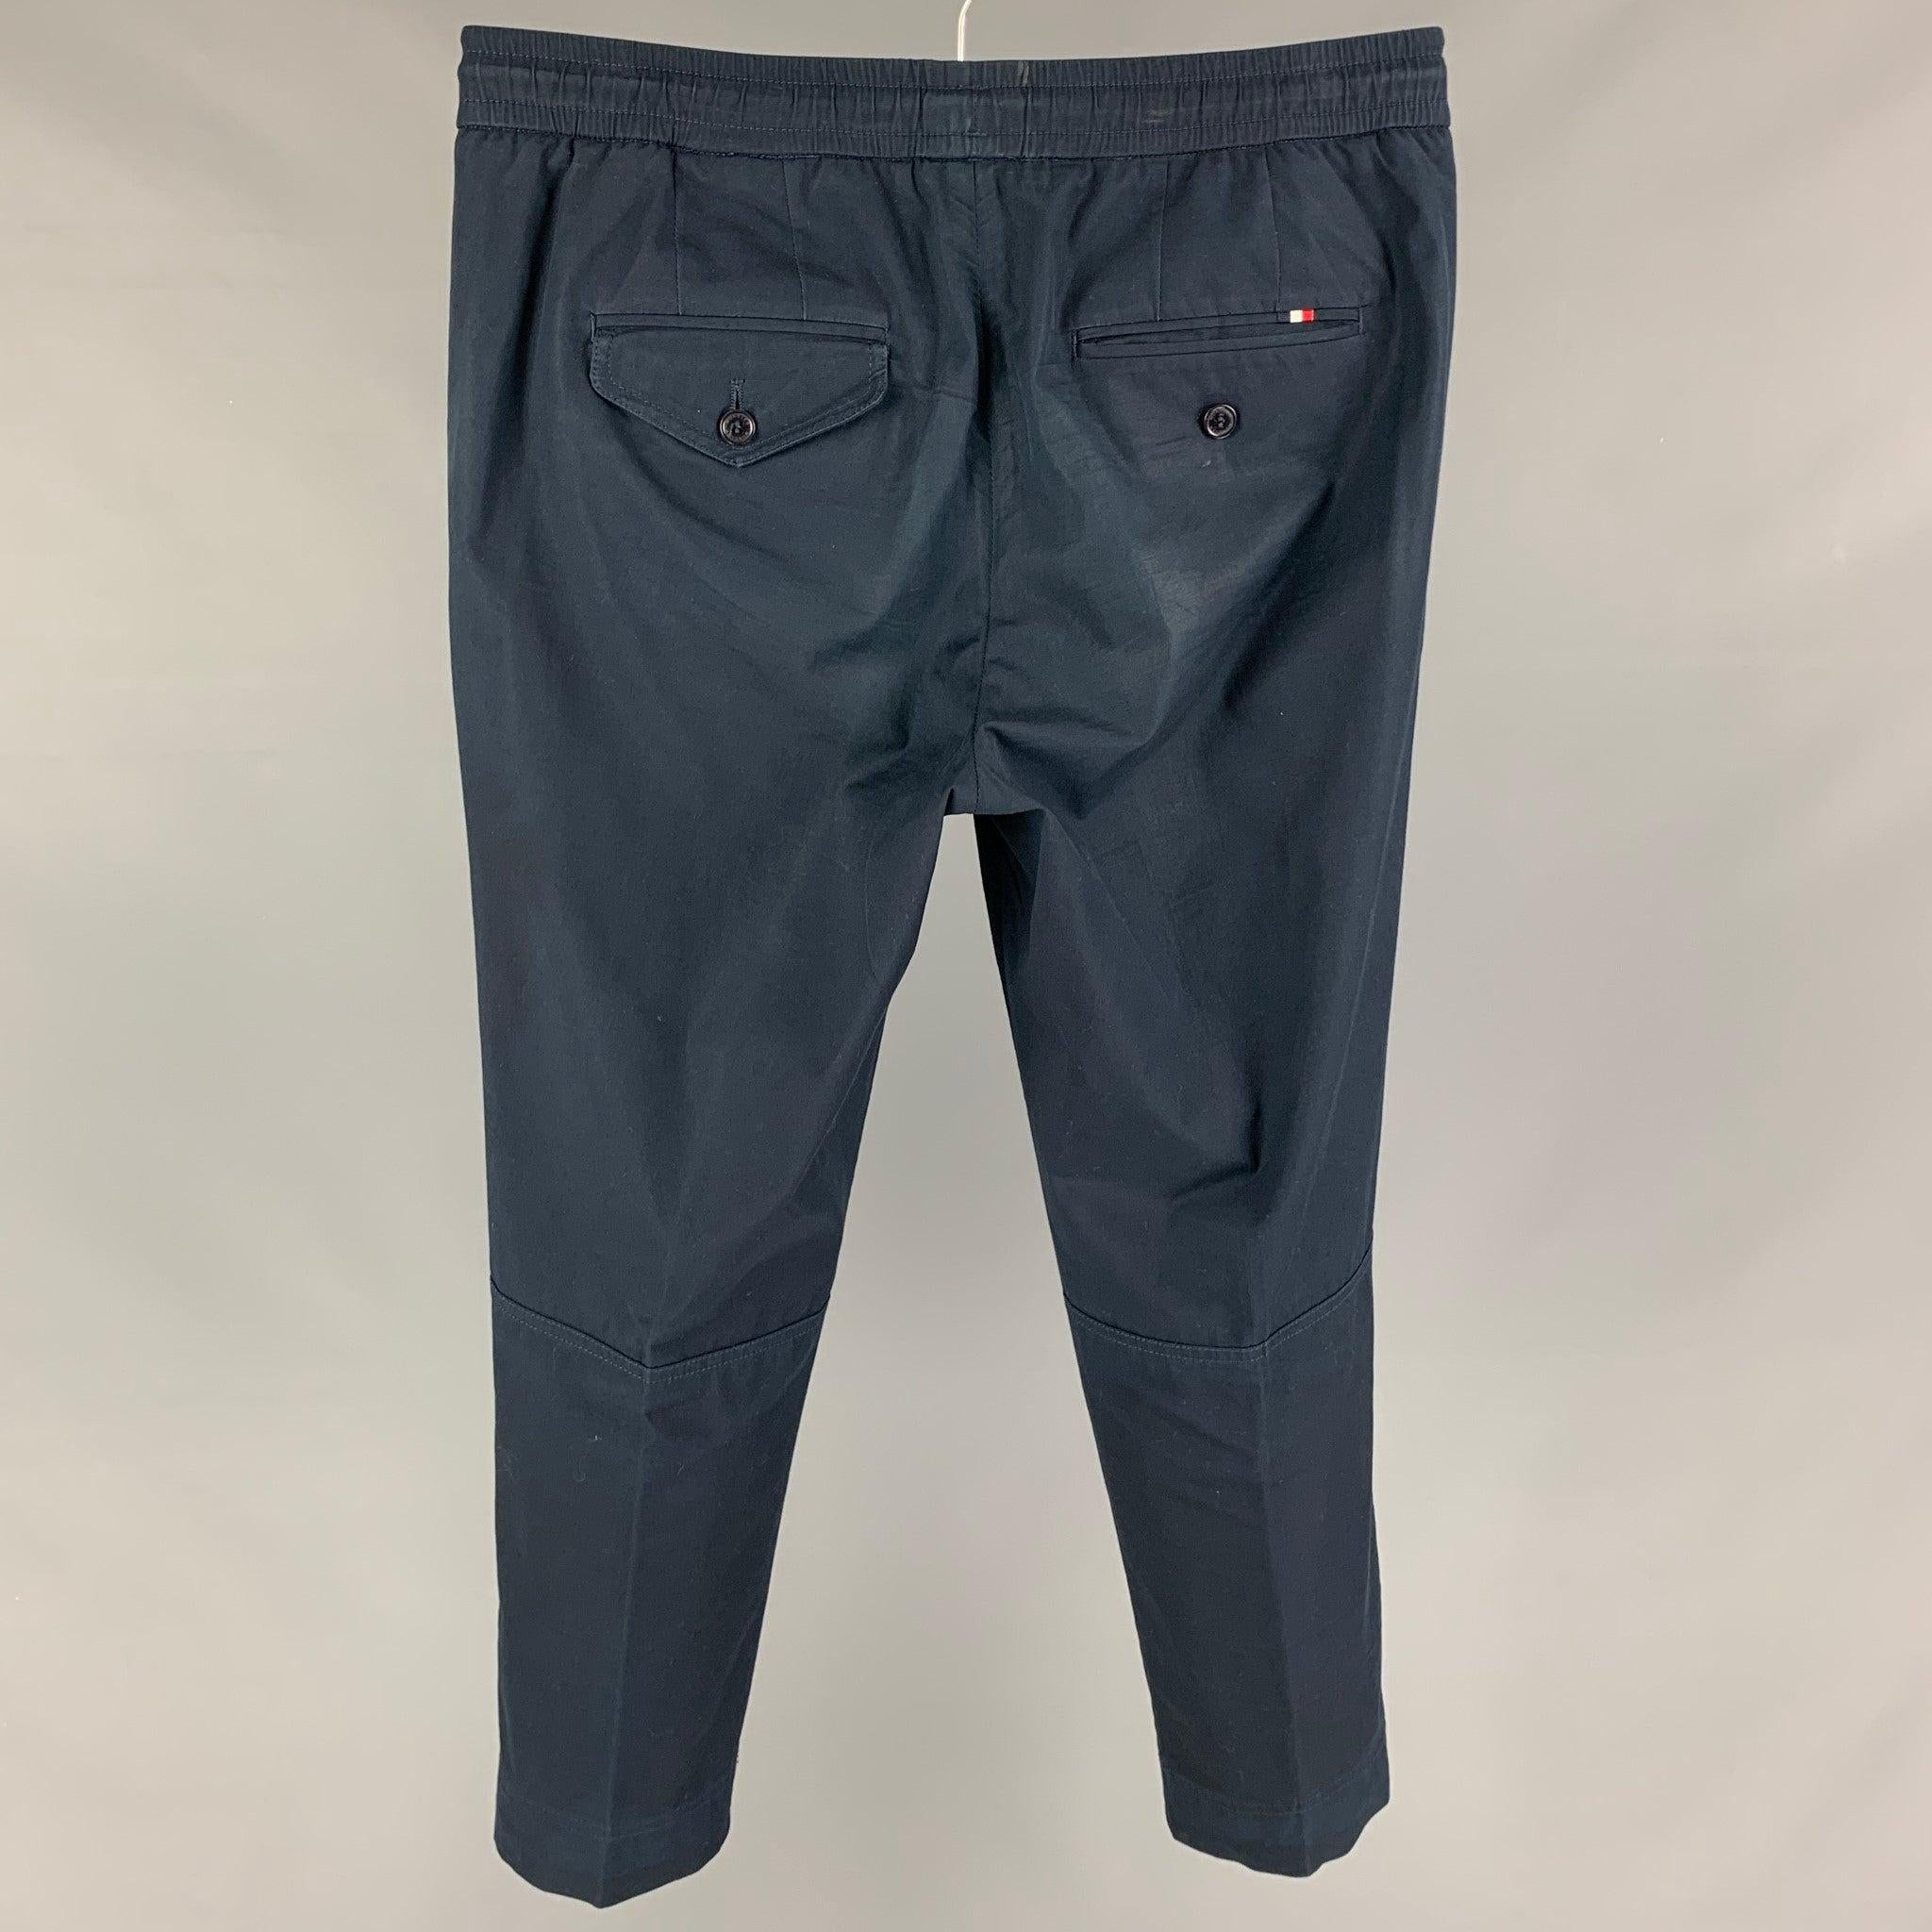 MONCLER Size 30 Blue Navy Cotton Drawstring Casual Pants In Good Condition For Sale In San Francisco, CA